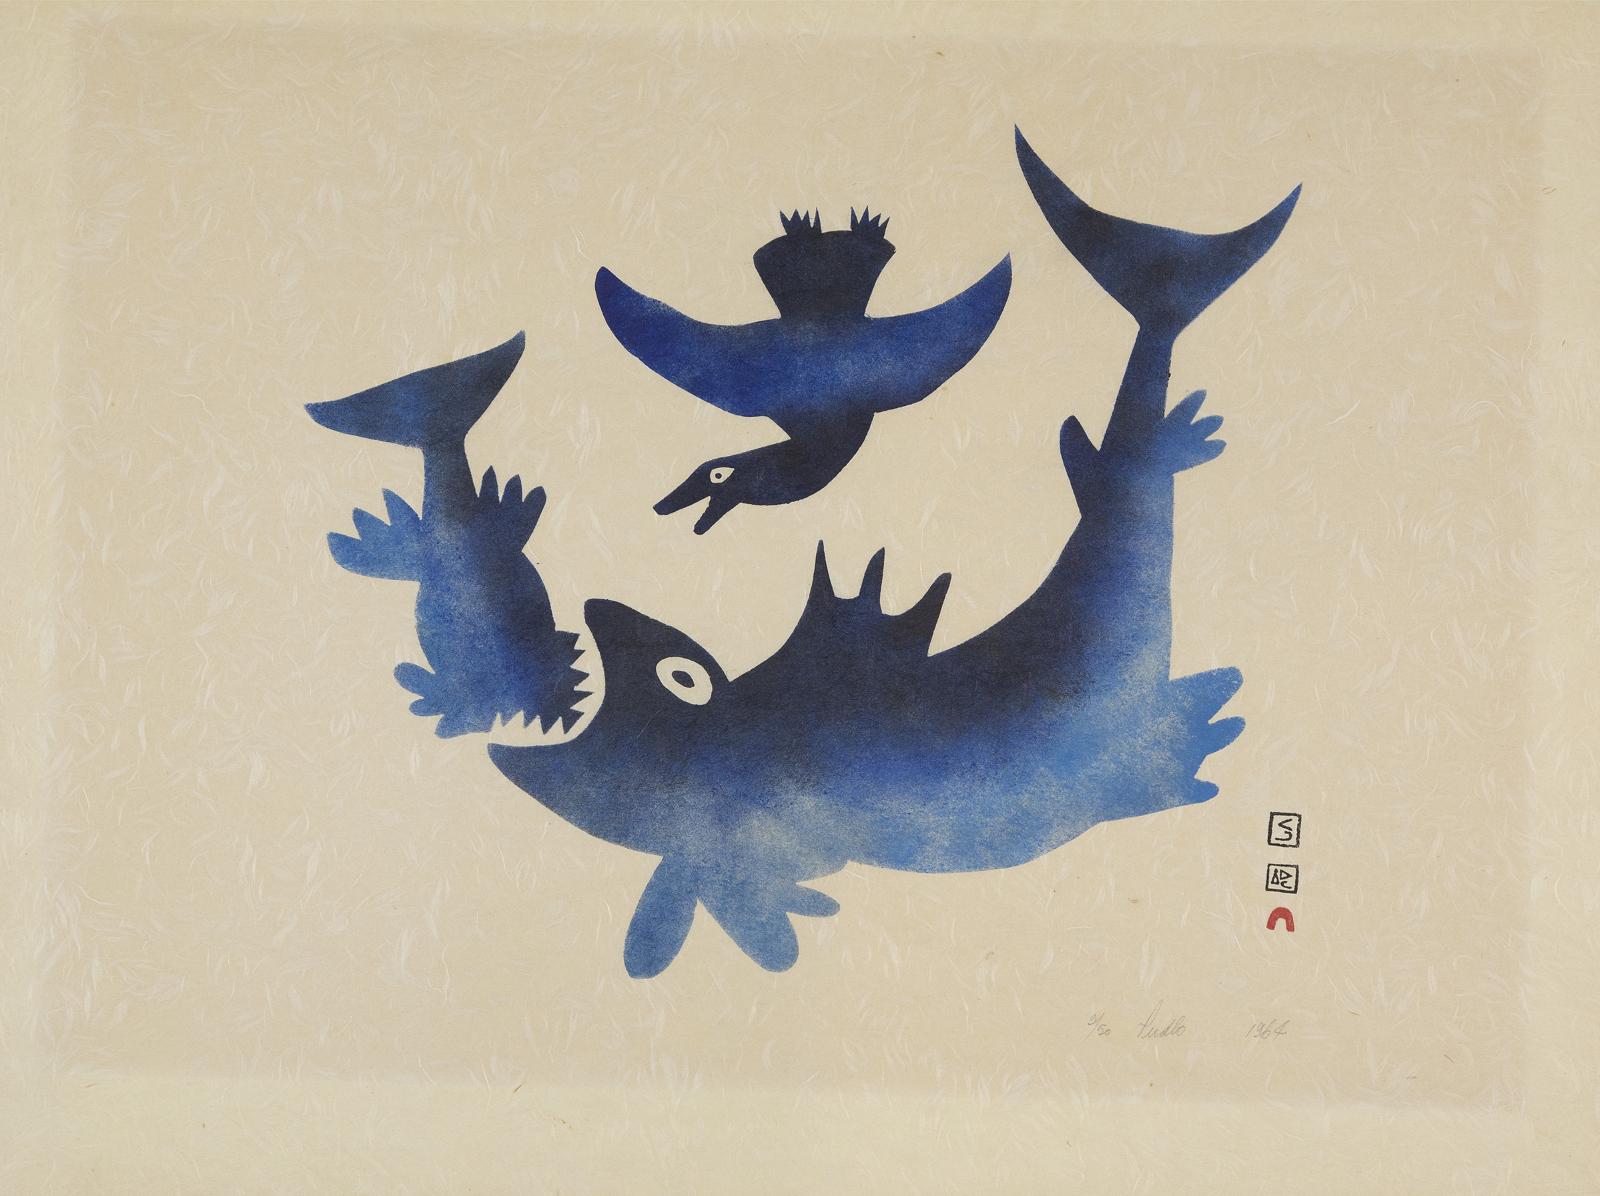 Pudlo Pudlat (1916-1992) - Fish And Gull/ Untitled (Sea Creatures And Bird)